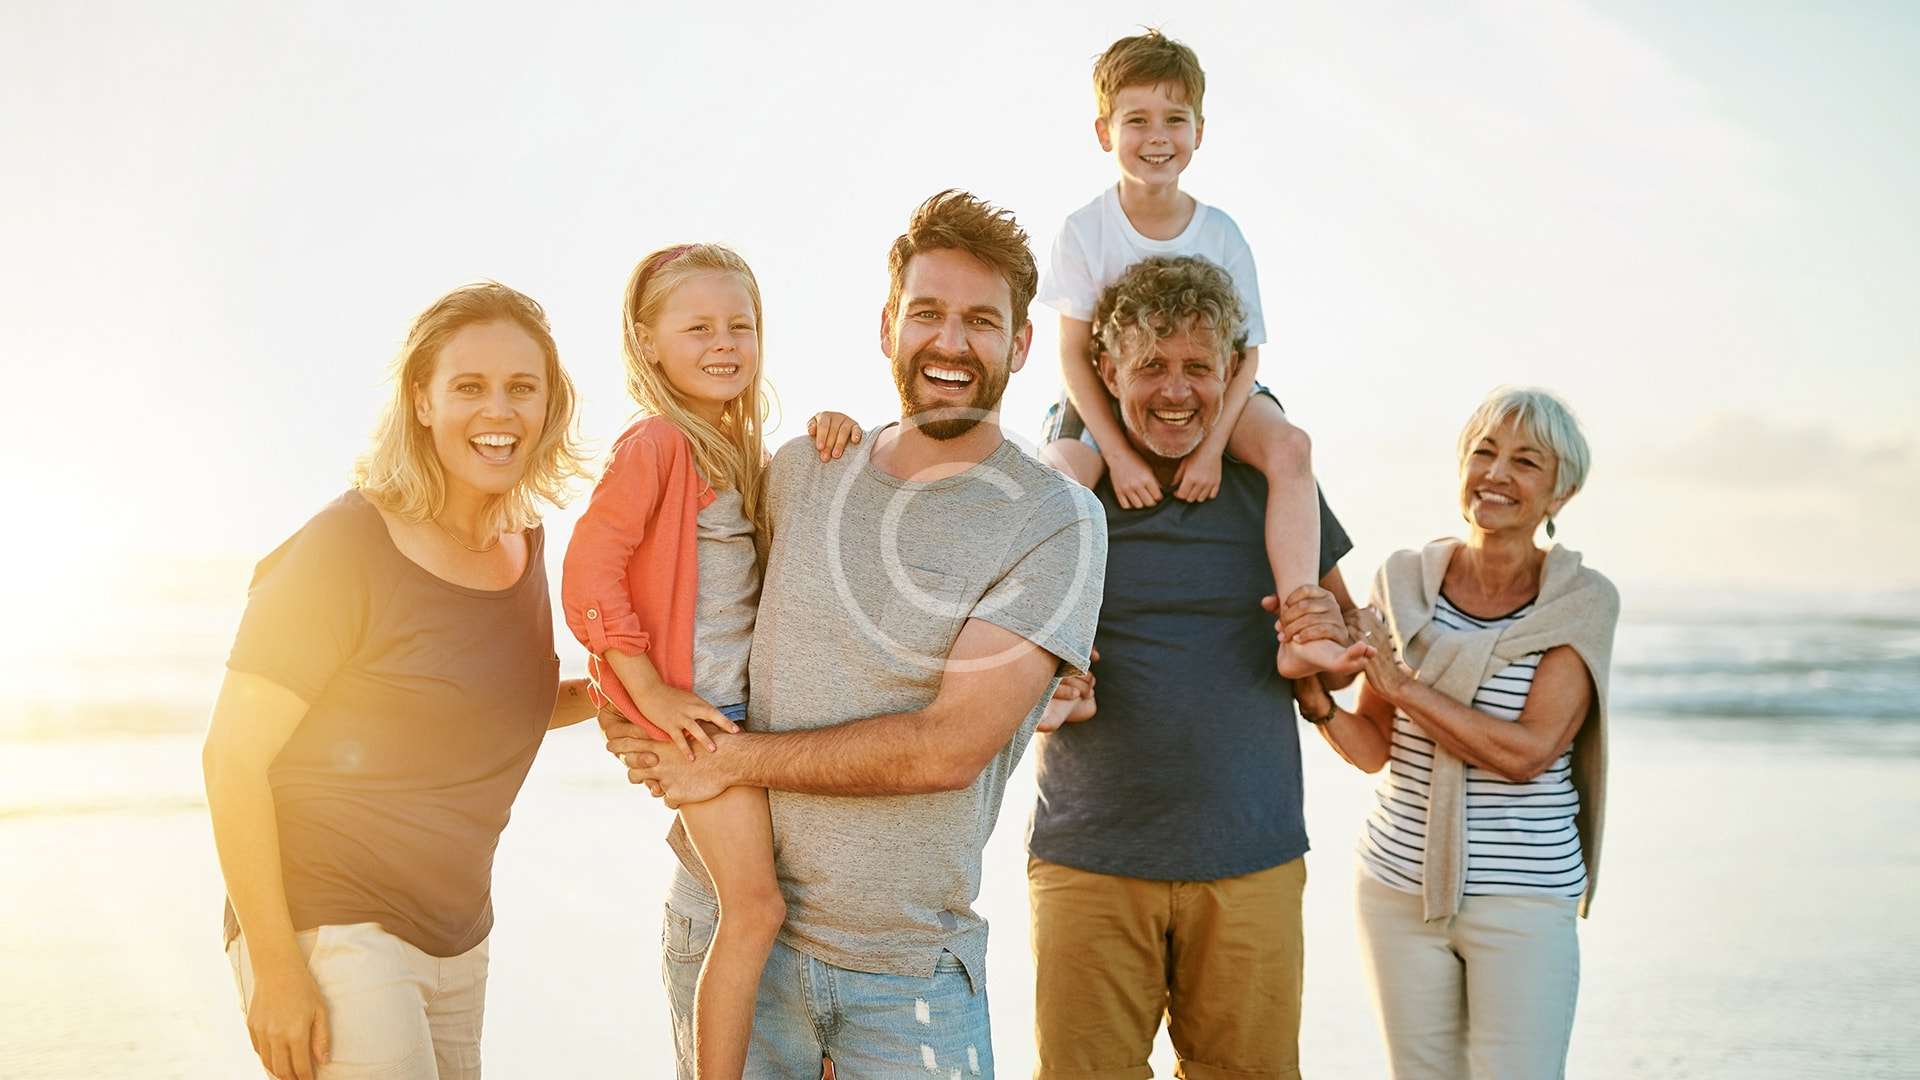 Are you looking to start a new family? Here’s how to avoid challenges